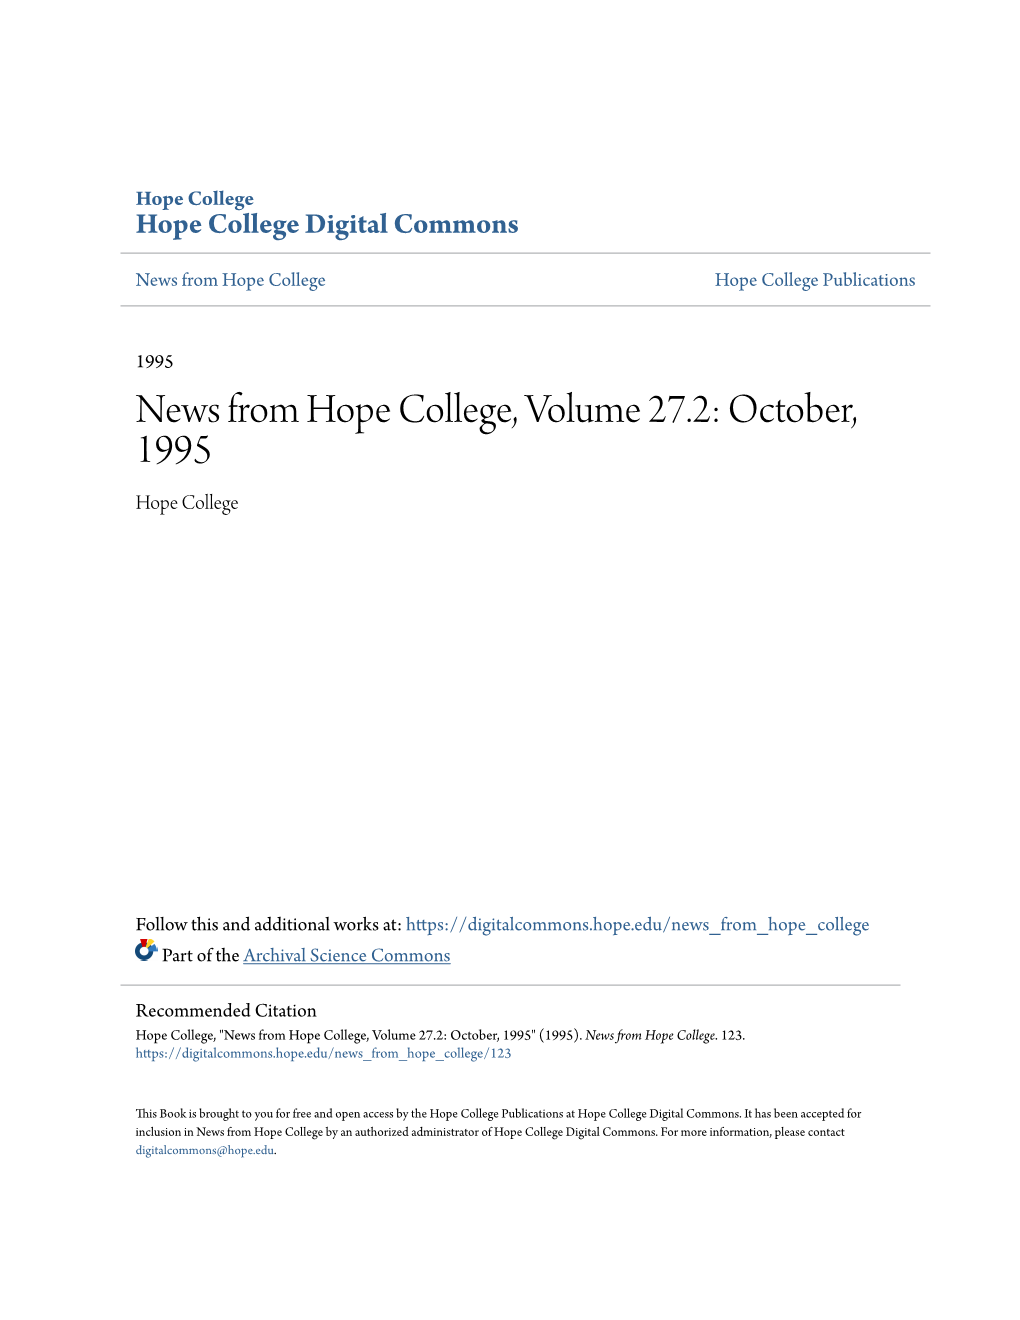 News from Hope College, Volume 27.2: October, 1995 Hope College